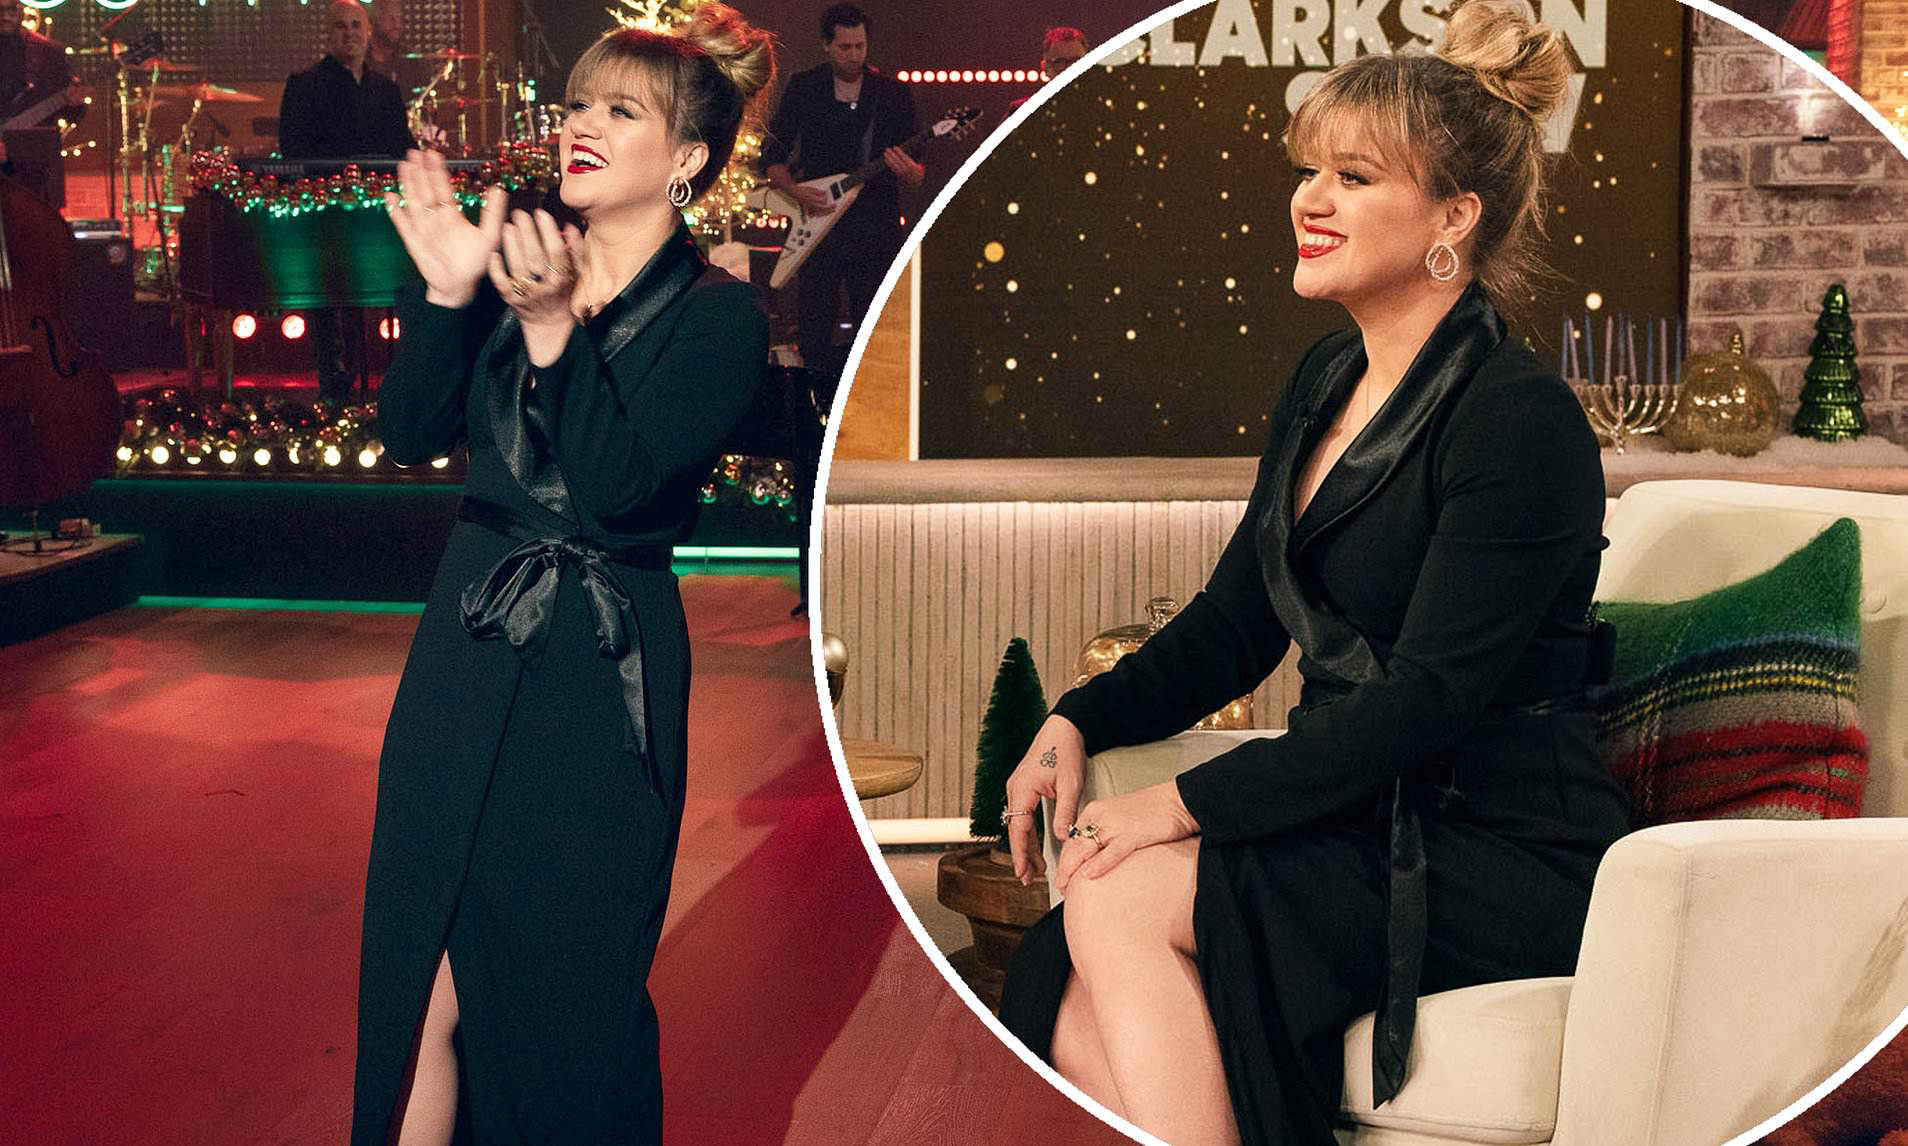 Kelly Clarkson, 41, shows off her weight loss in a black dress